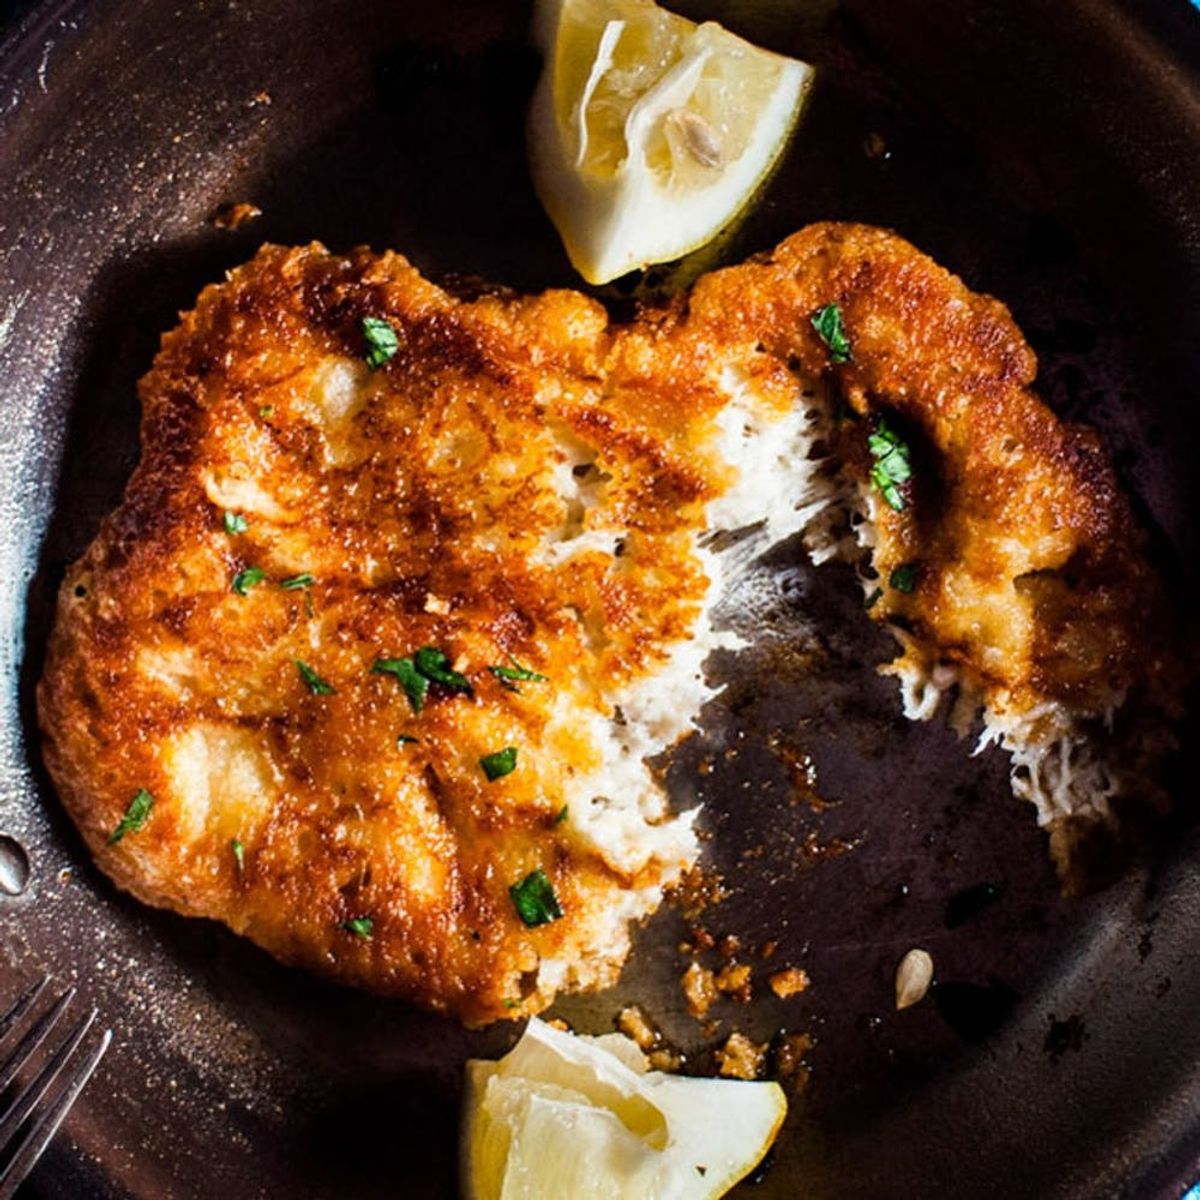 12 Fried Cheese Recipes for When You Want to Treat Yoself